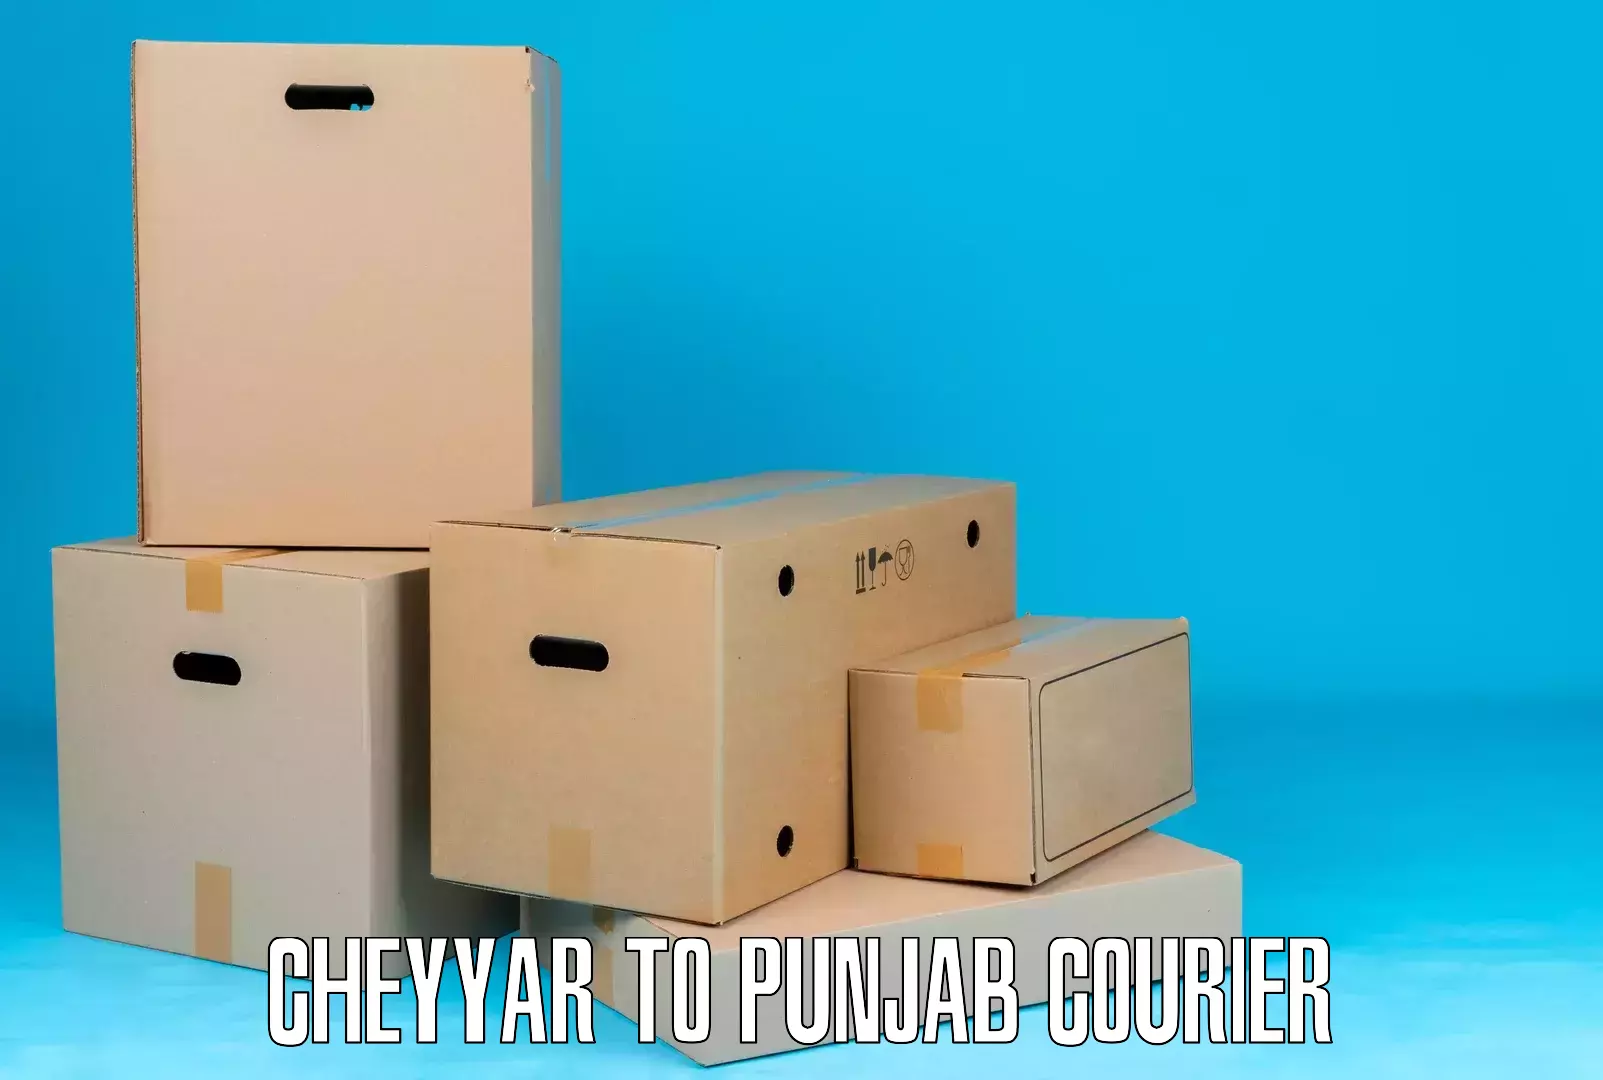 Special handling courier in Cheyyar to Patiala